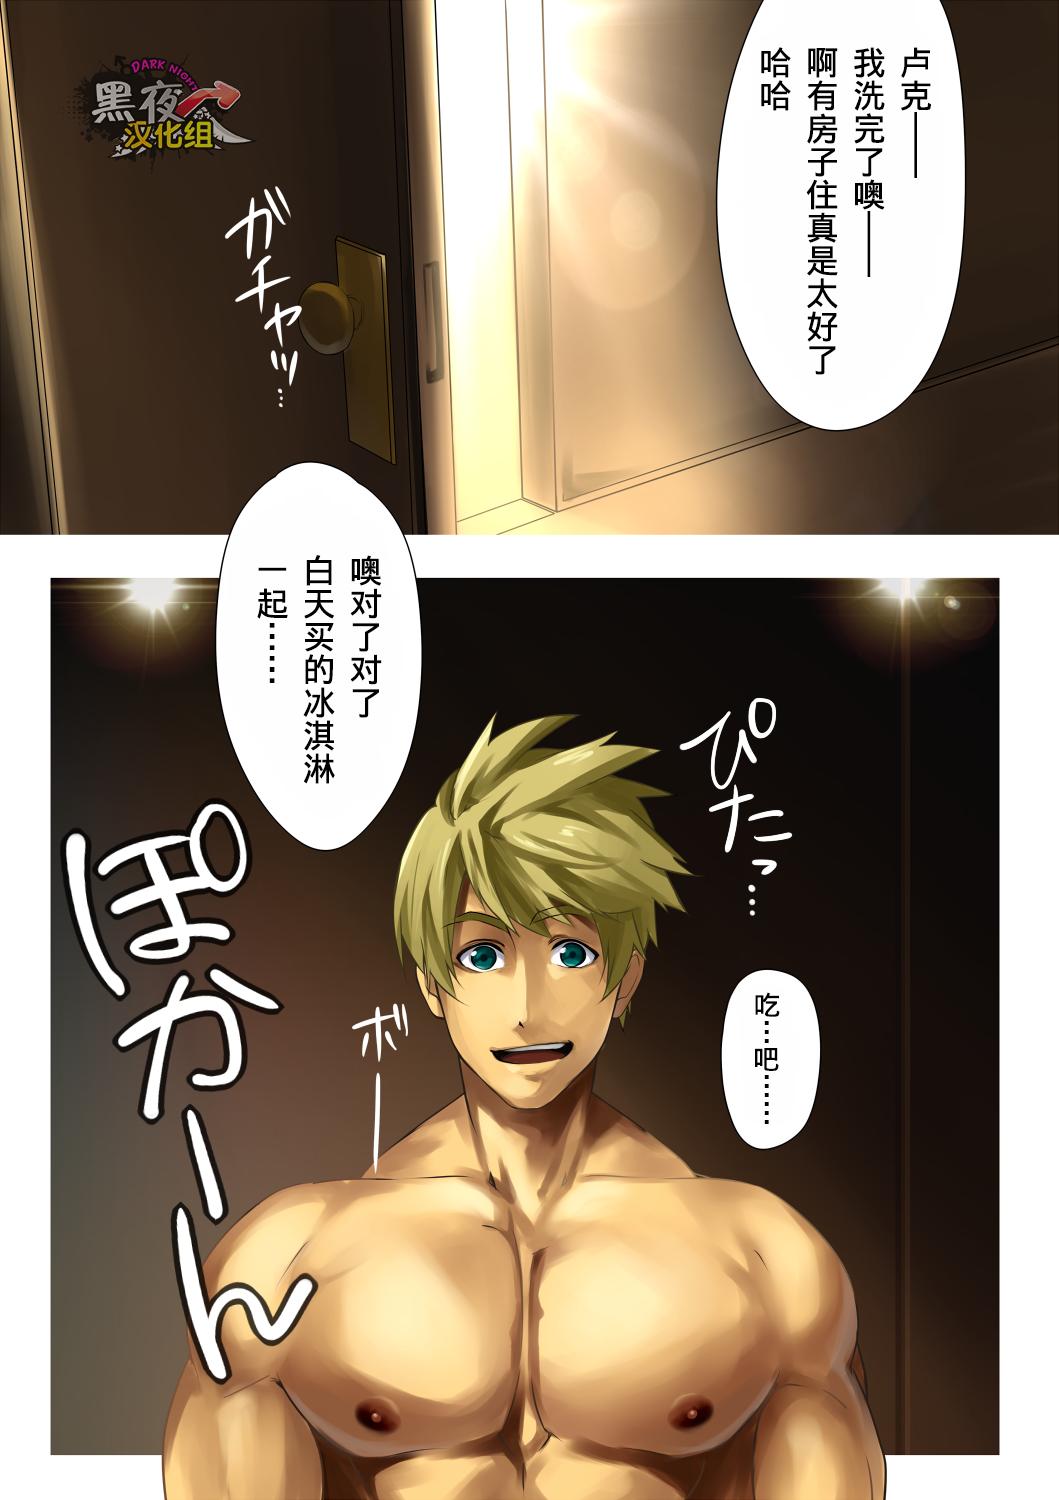 Sex malemilk - Tales of the abyss Dad - Page 7